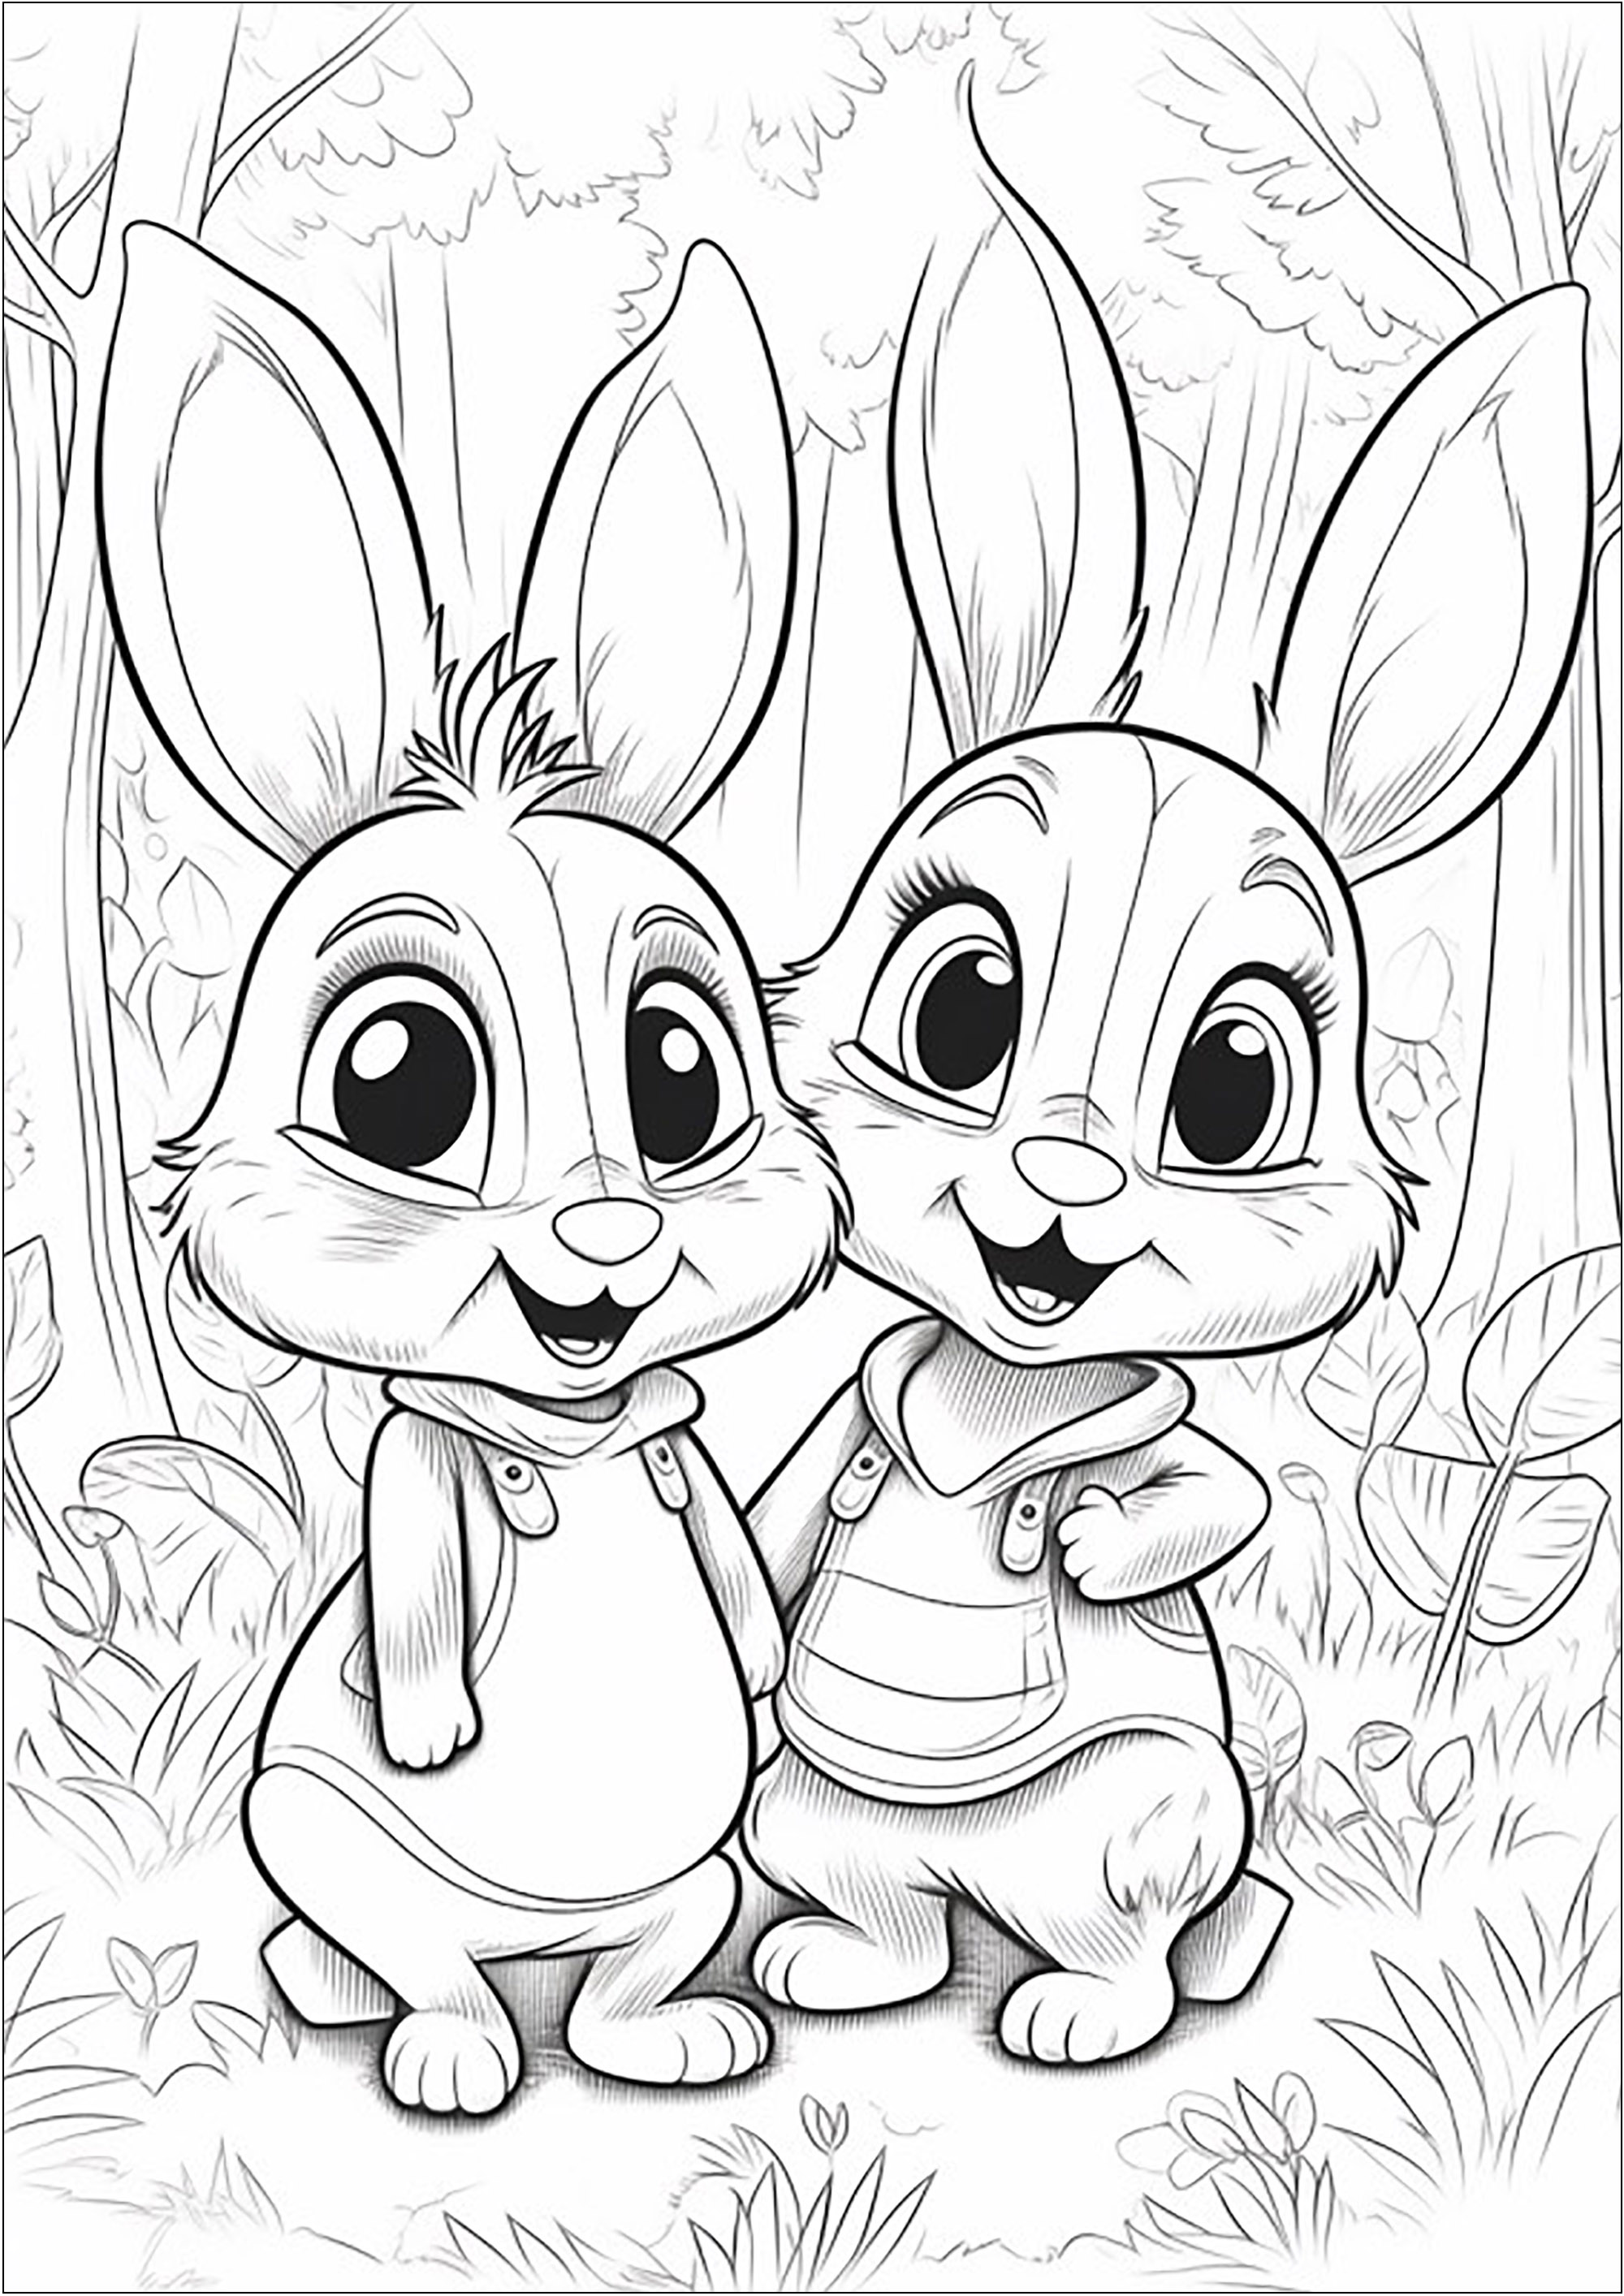 Two little rabbits in the forest - 1. Two smiling rabbits, in a beautiful forest